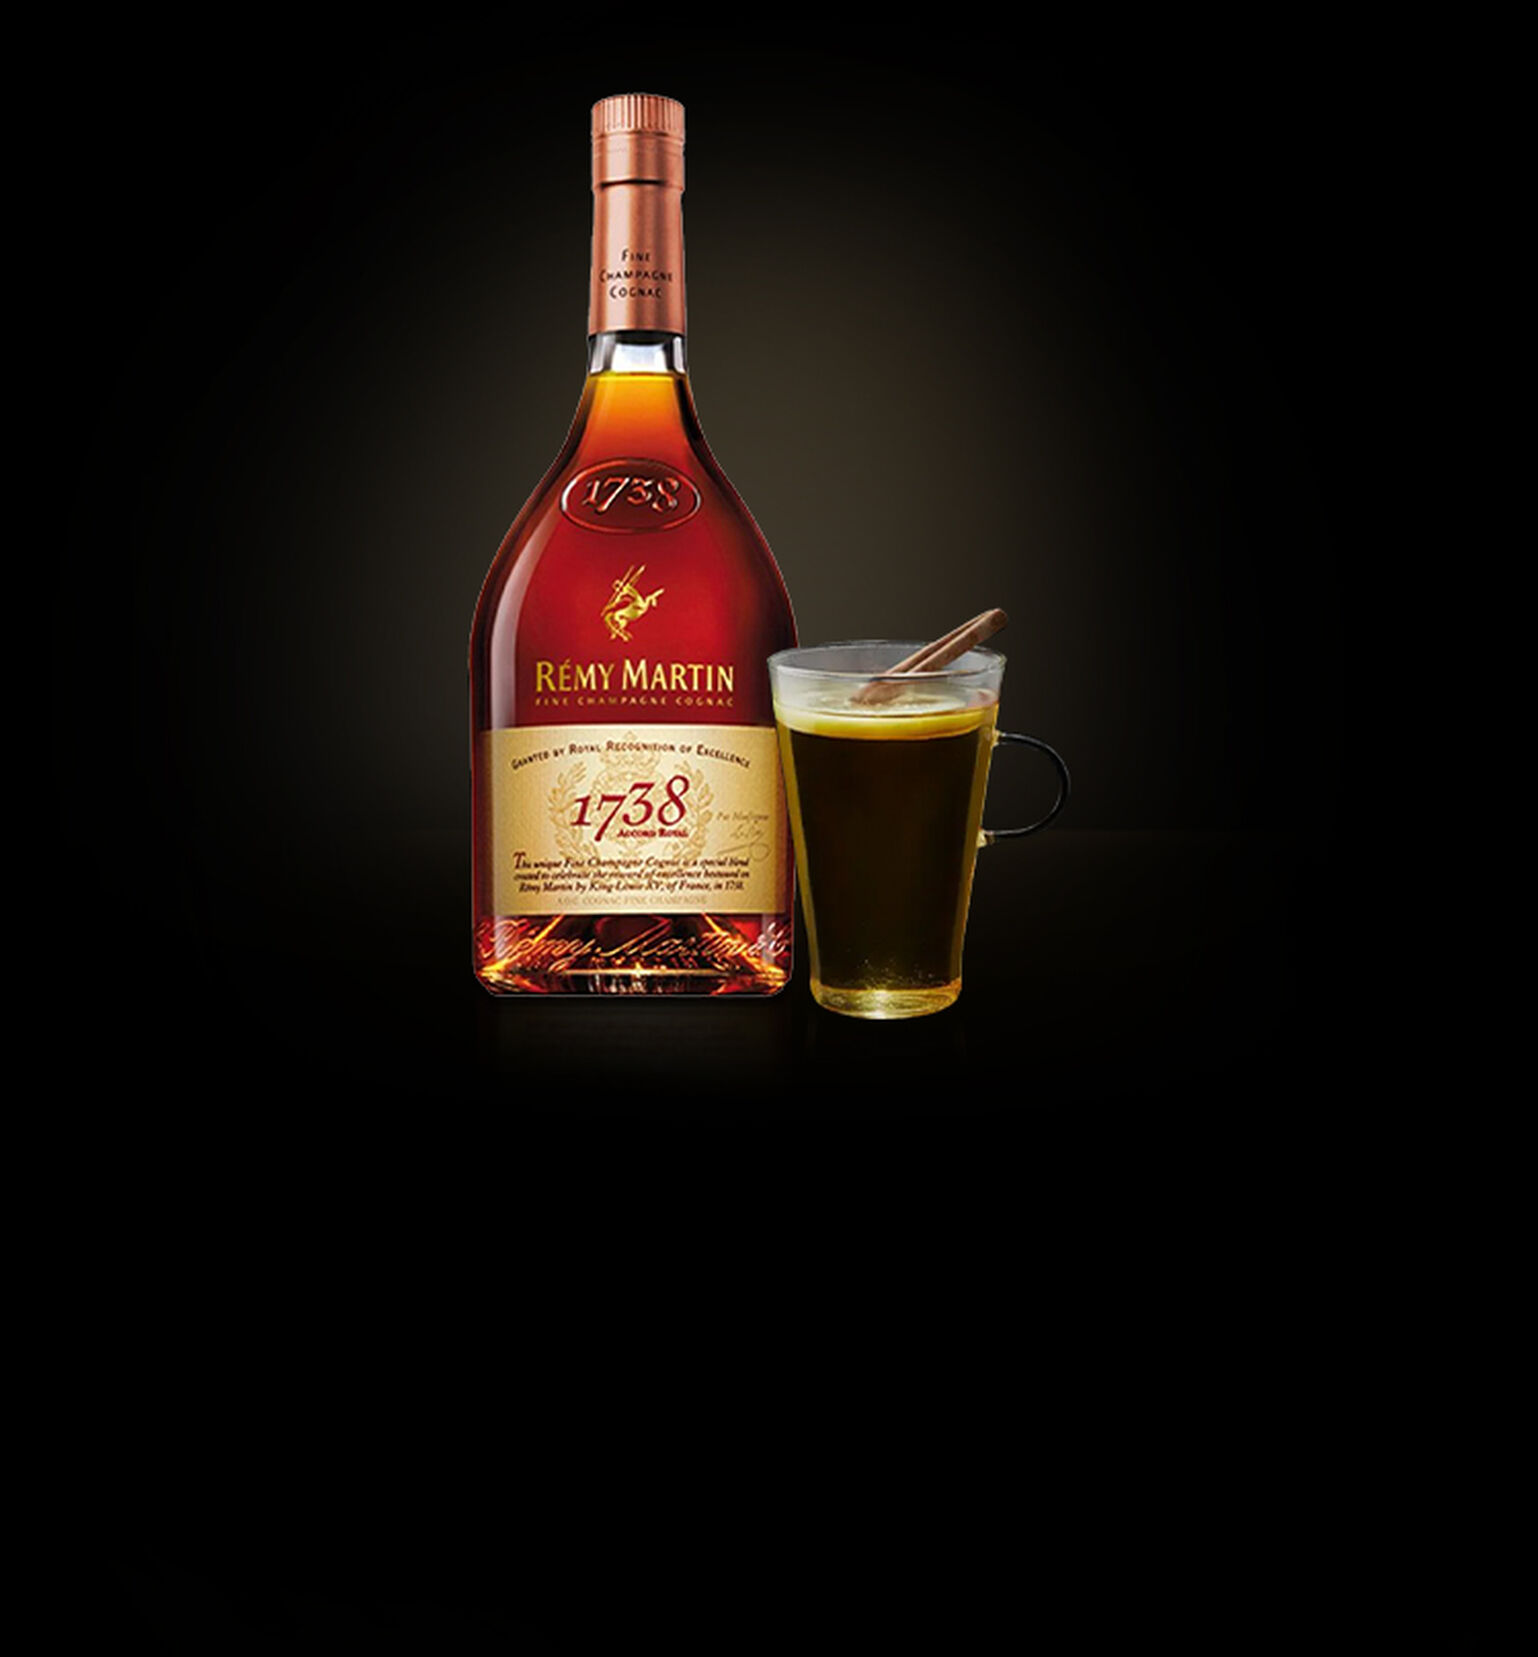 The Rémy Martin Hot Toddy Cocktail